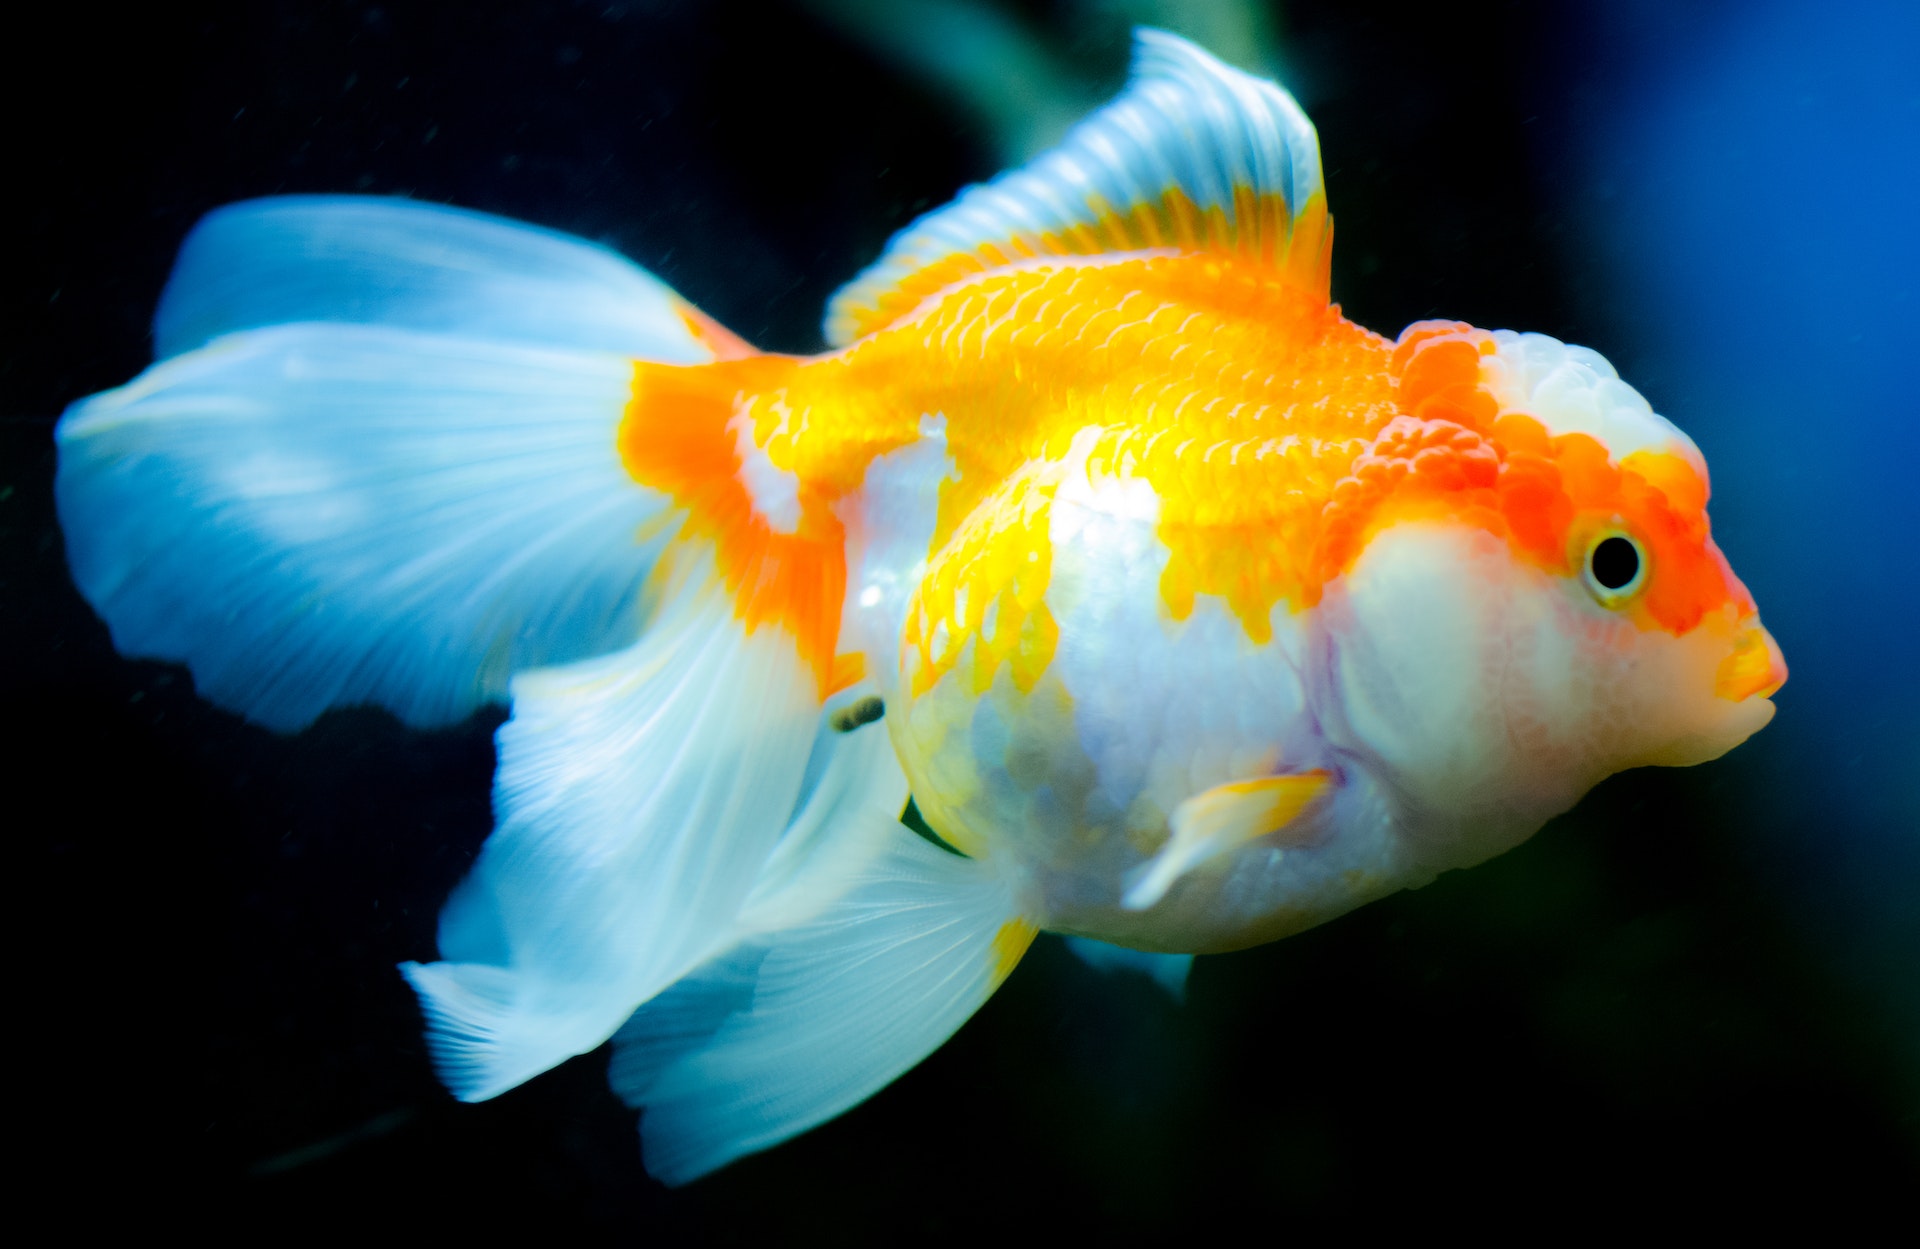 The Ultimate Guide to Identifying Your Betta Fish as a Yellow Hellboy